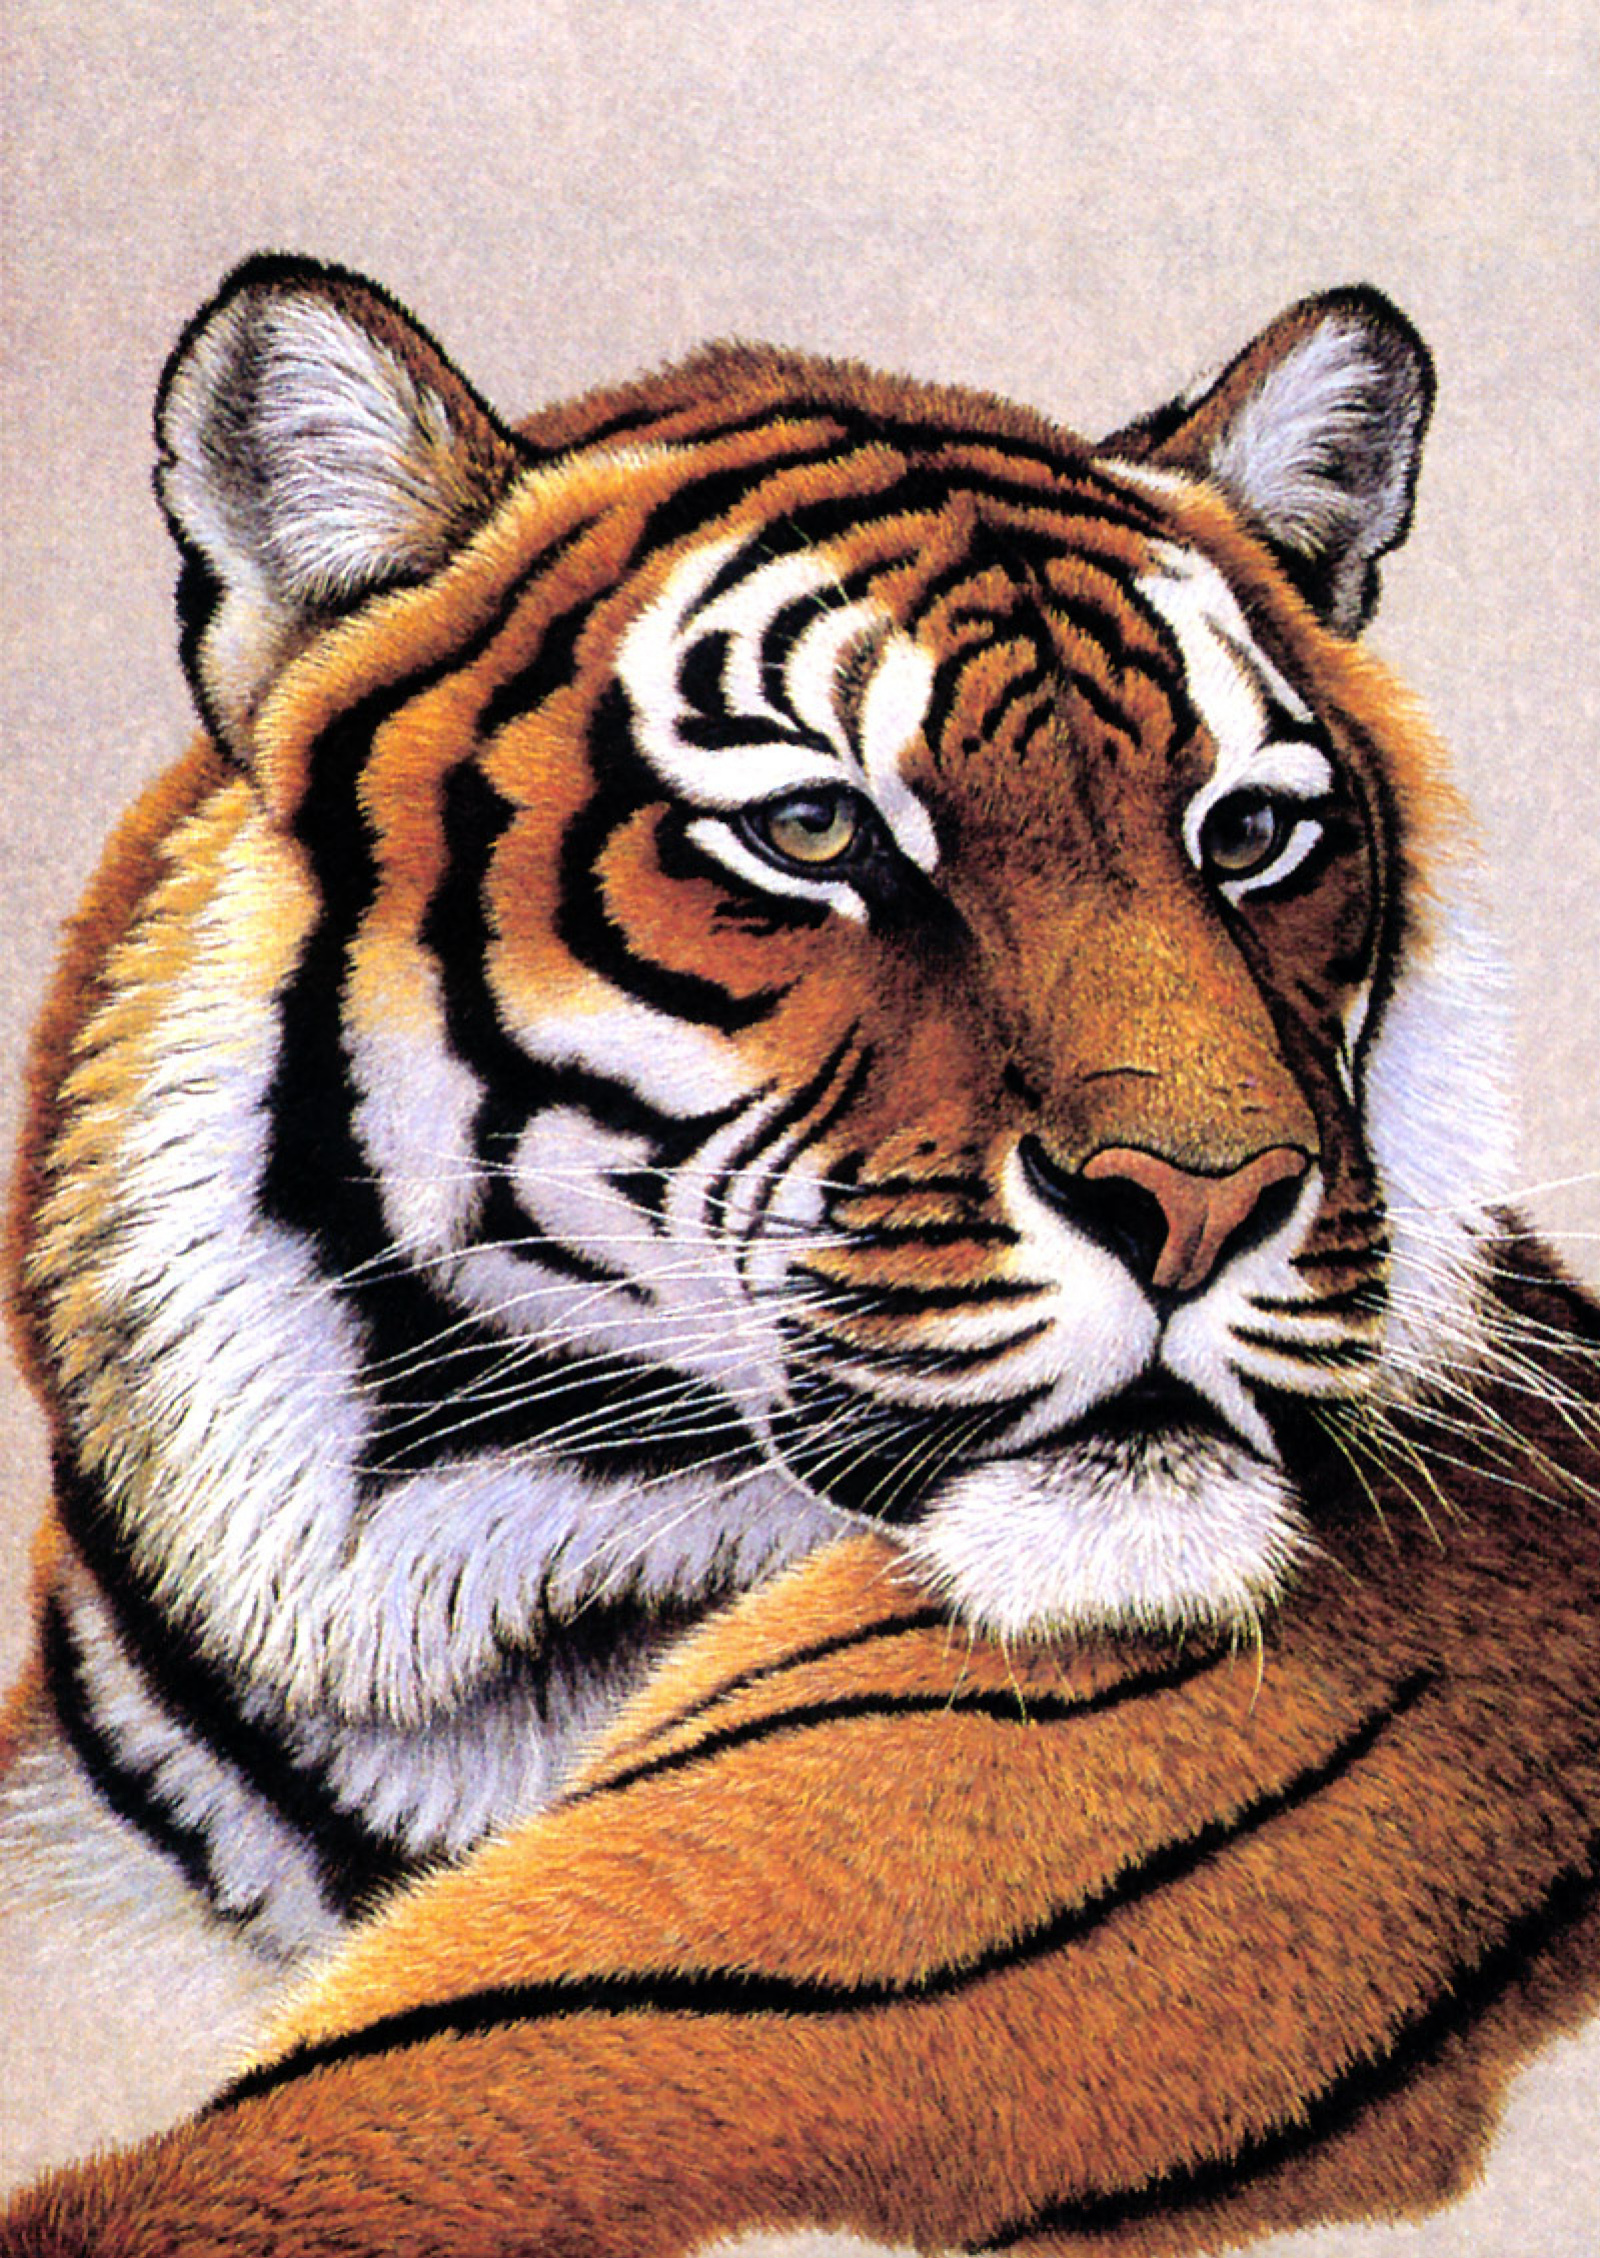 History - THE BENGAL TIGER